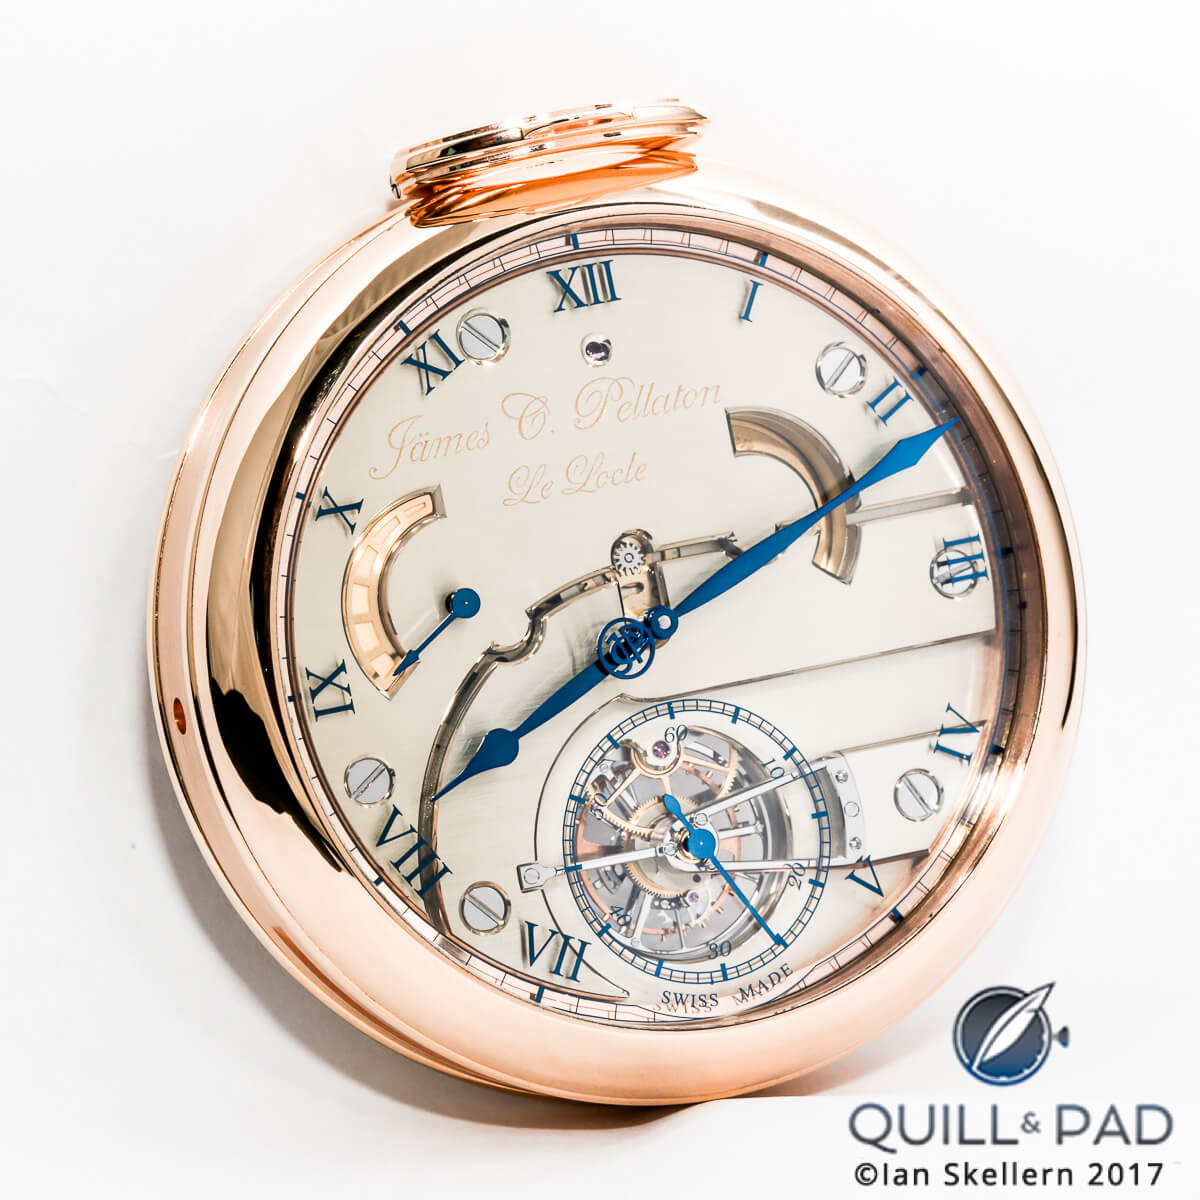 James Pellaton also has an absolutely stunning Marine Chronometer pocket watch in its collection